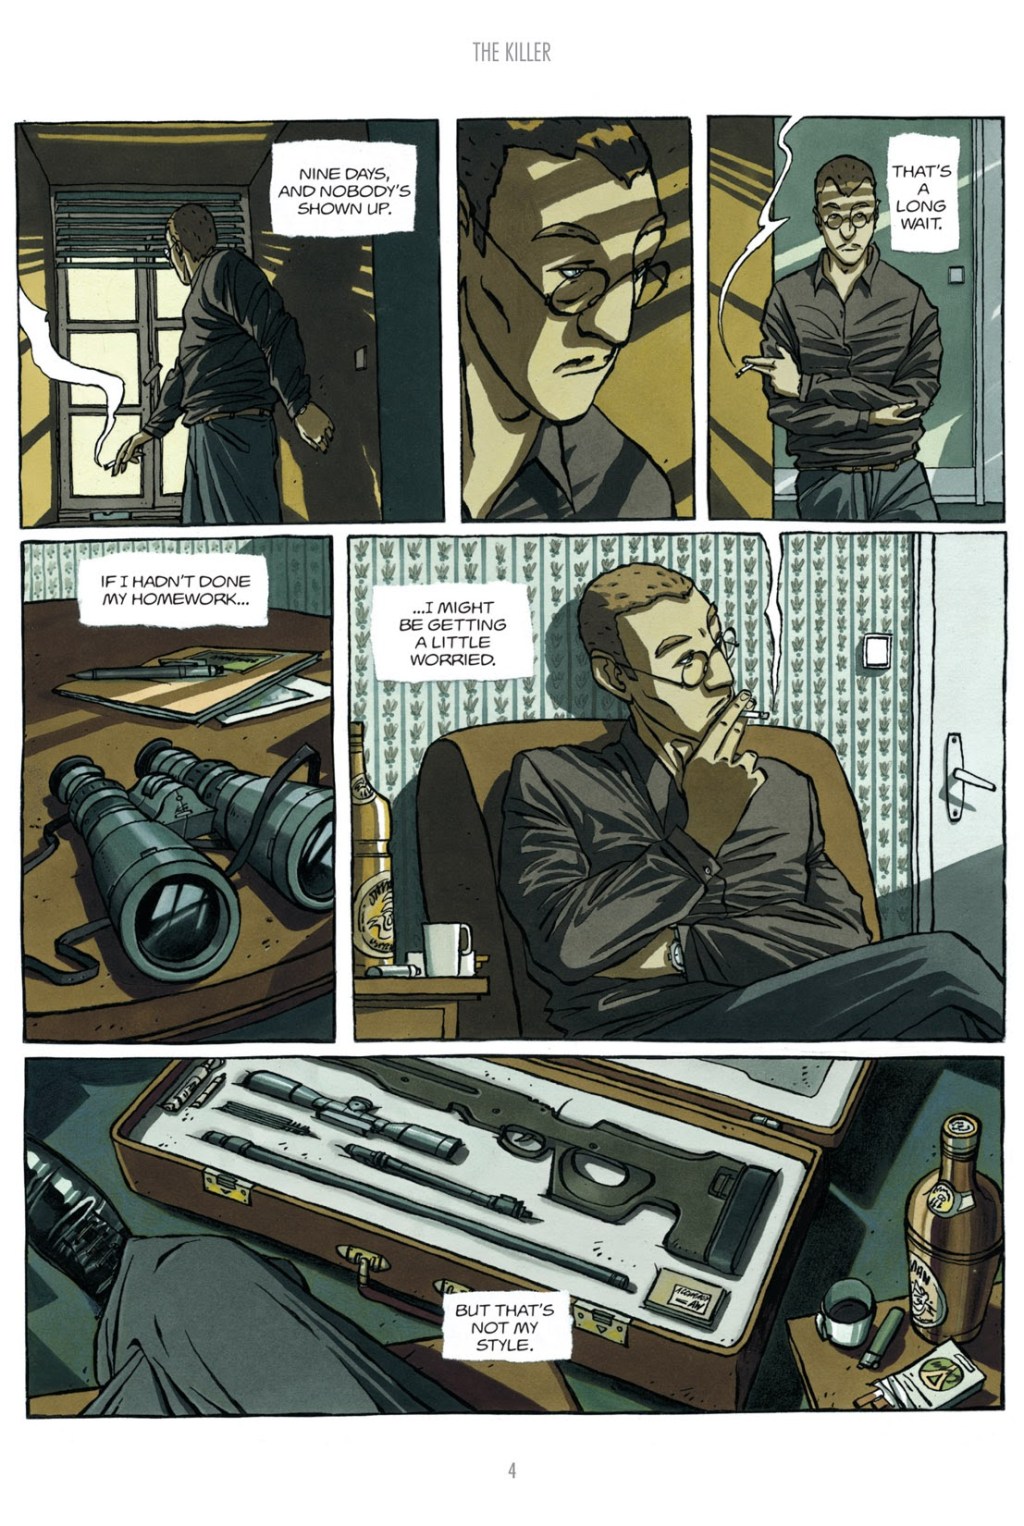 The Killer Vol. 1 Issue #1 "Long Fire, Part One" (2006), Archaia. Words by Matz, art by Luc Jacamon